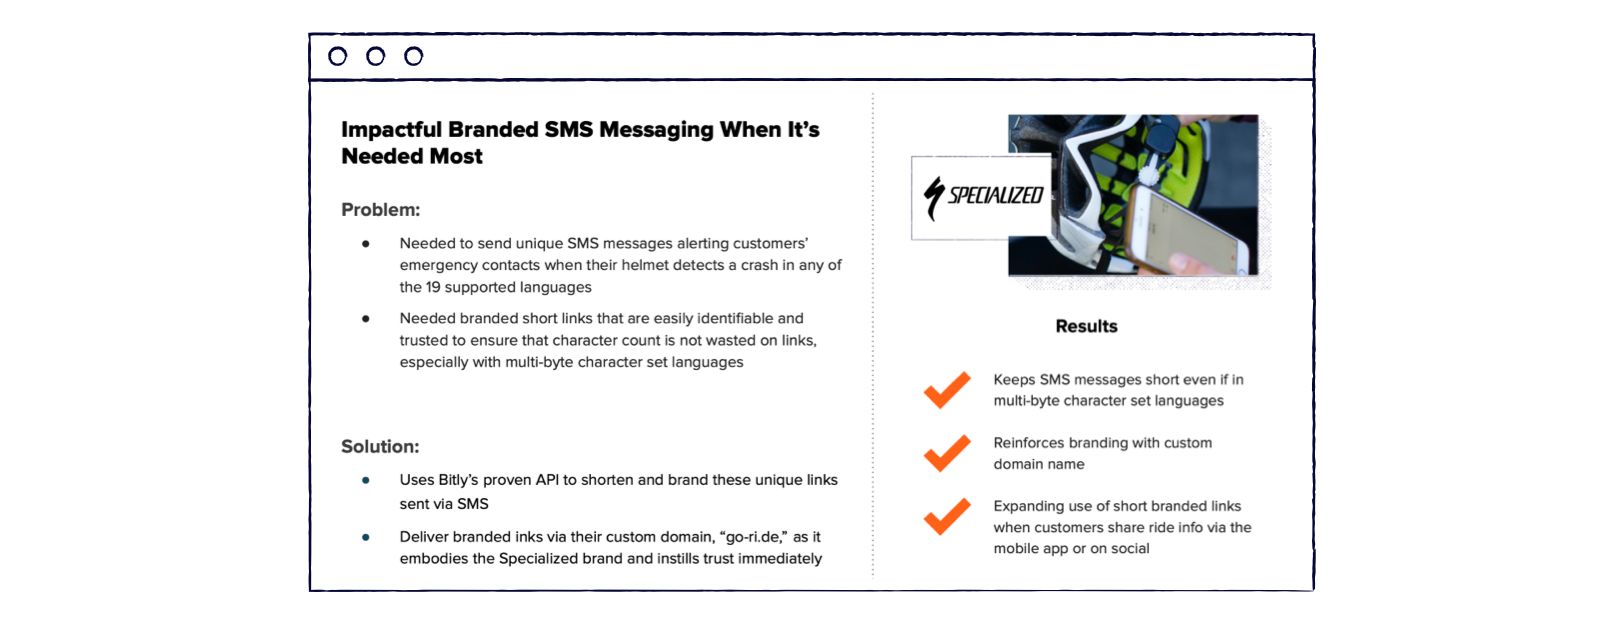 Use case spotlight: Impactful Branded SMS Message When It's Needed Most